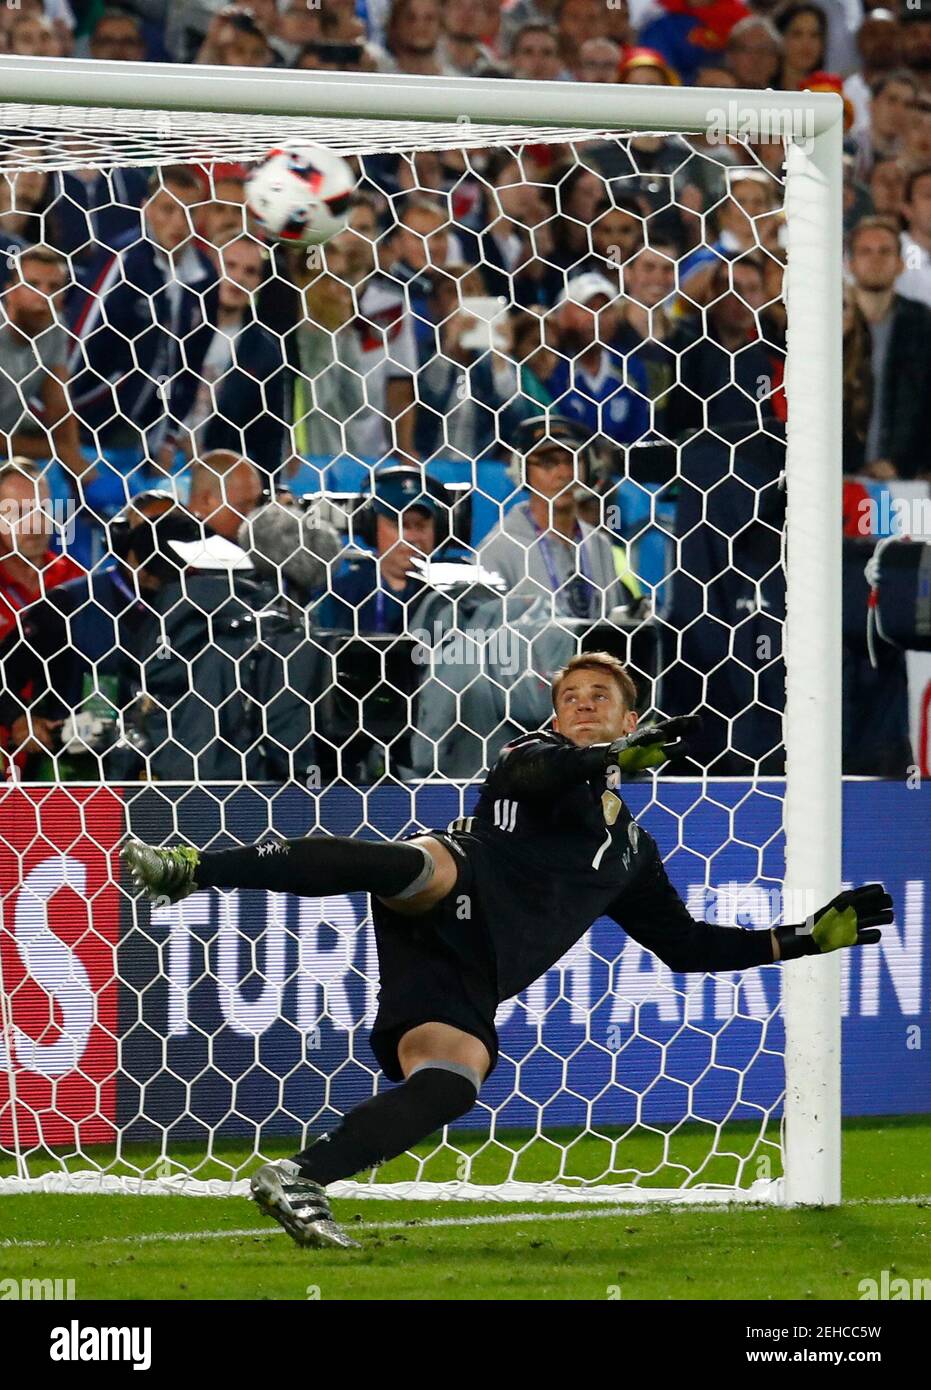 Football Soccer - Germany v Italy - EURO 2016 - Quarter Final - Stade de Bordeaux, Bordeaux, France - 2/7/16  Germany's Manuel Neuer attempts a save during the penalty shootout  REUTERS/Michael Dalder  Livepic Stock Photo